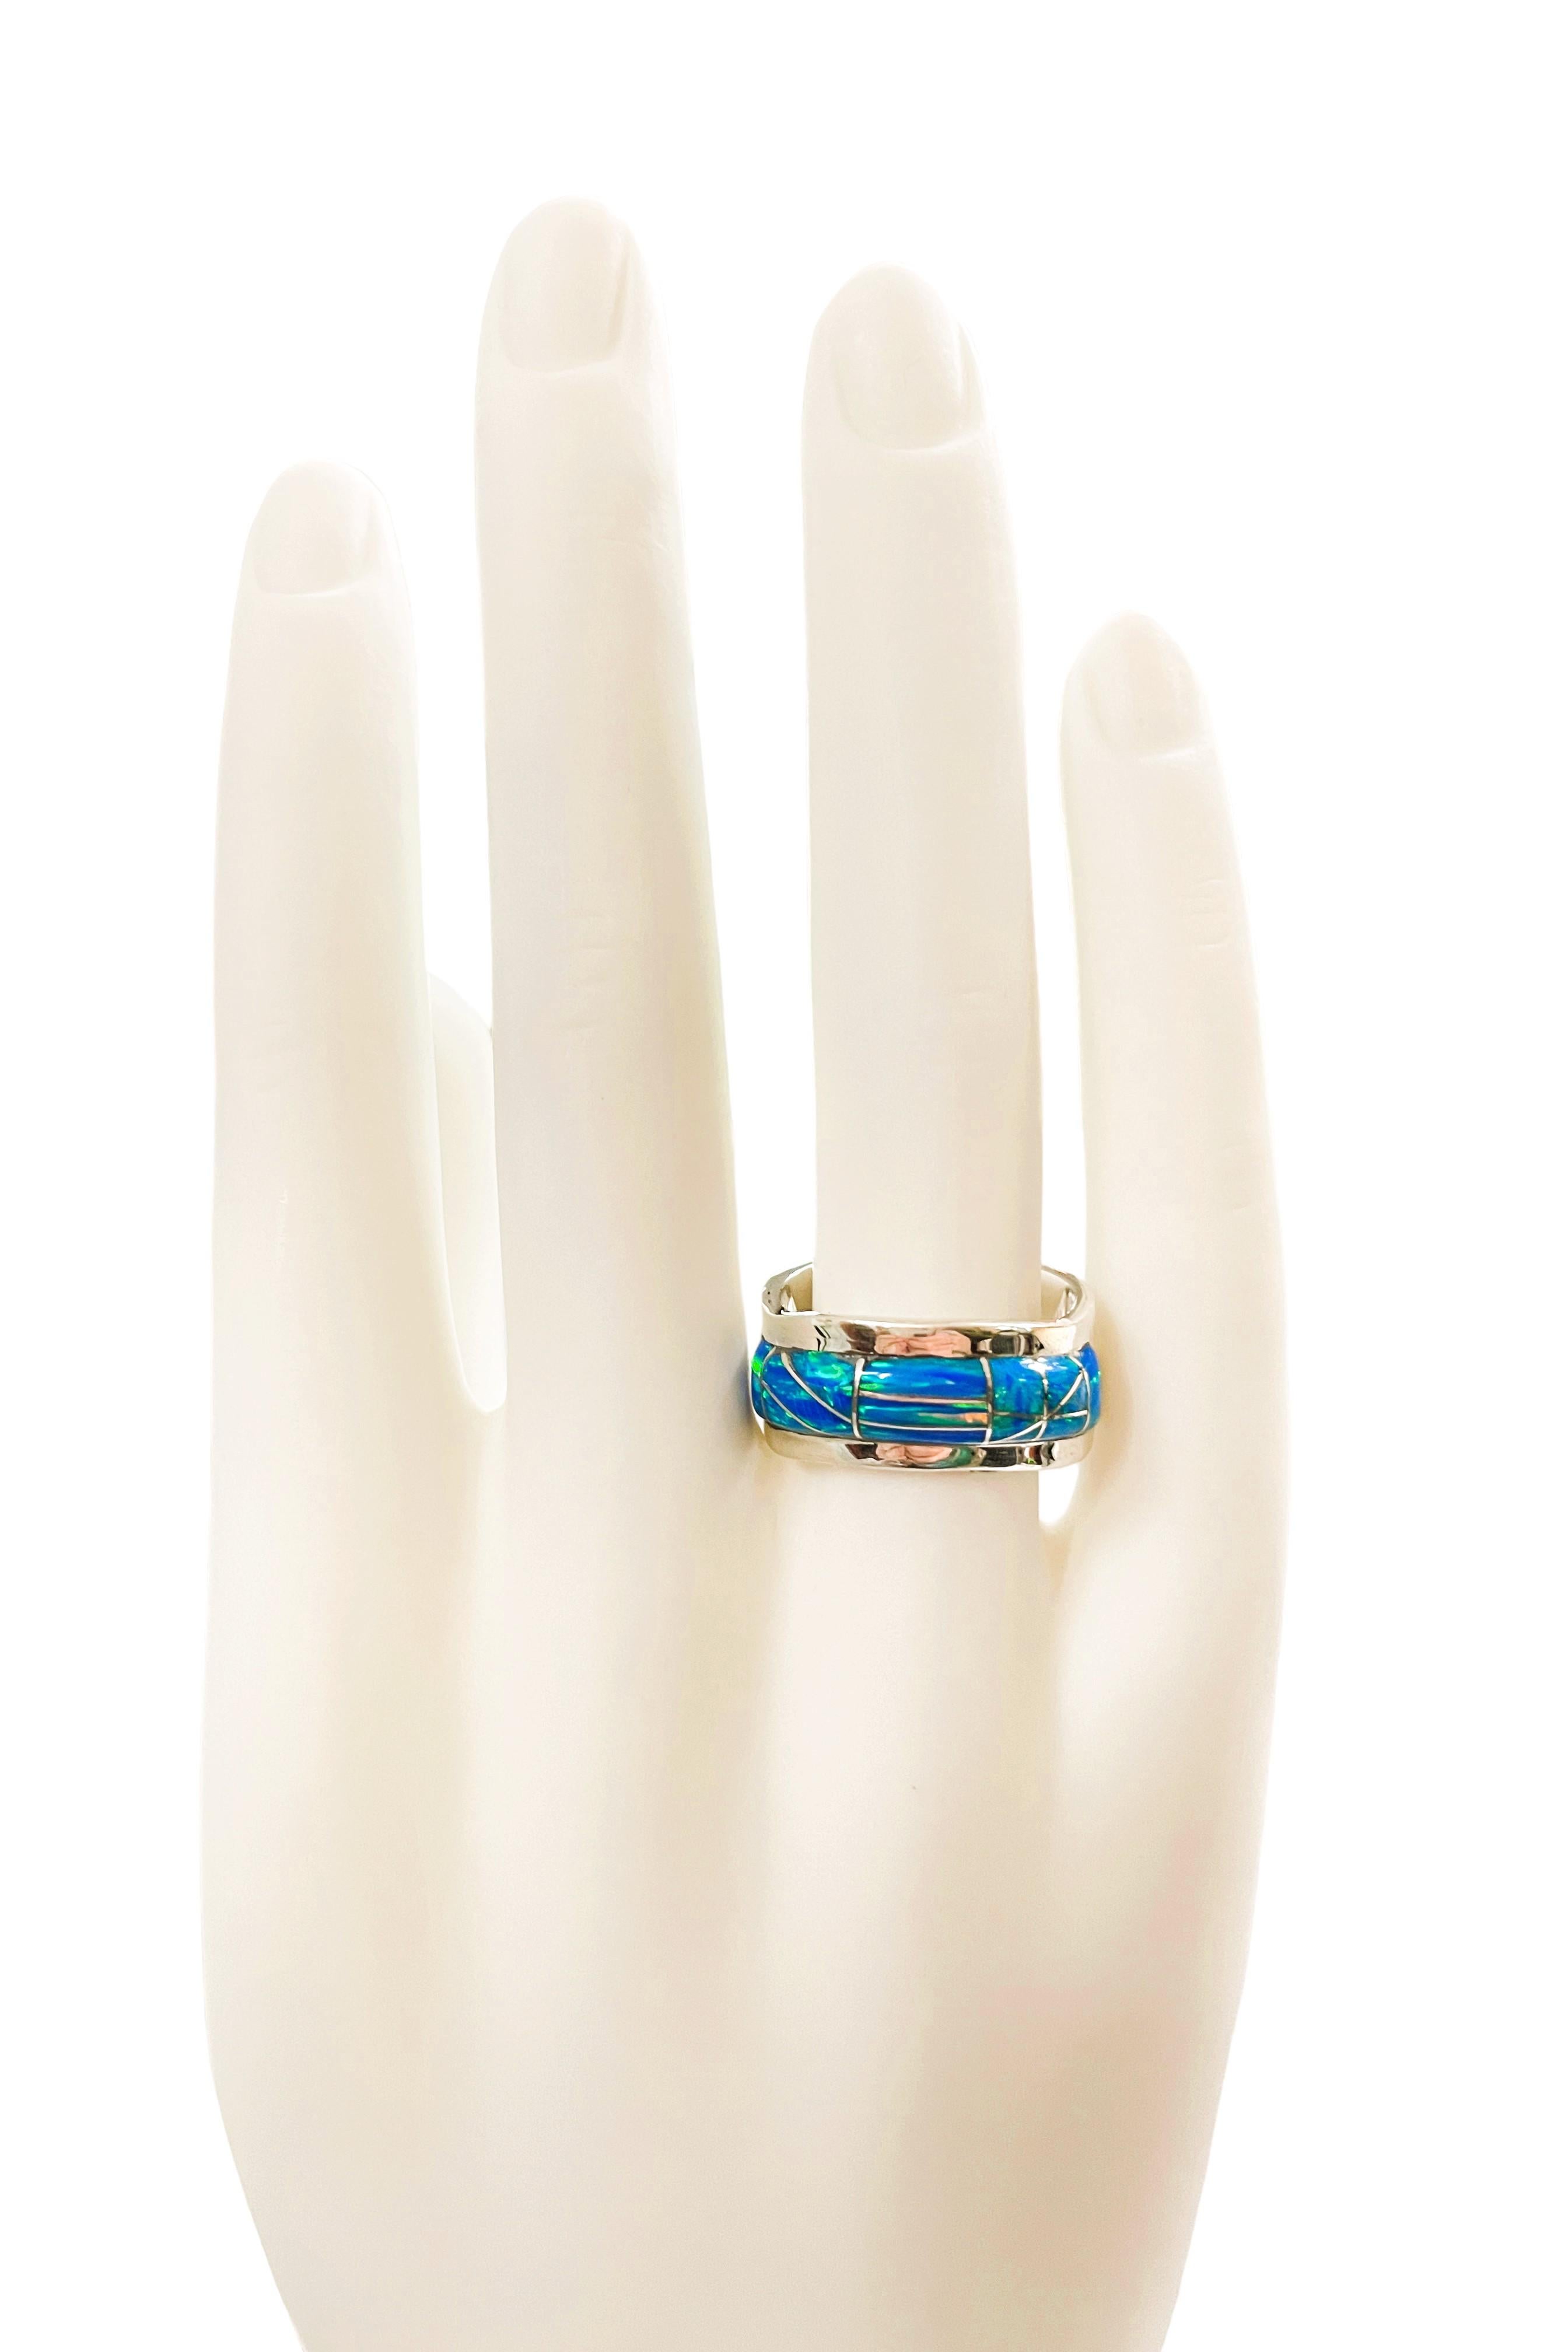 Sterling Silver Inlaid Opal Ring, Stamped by Designer 1